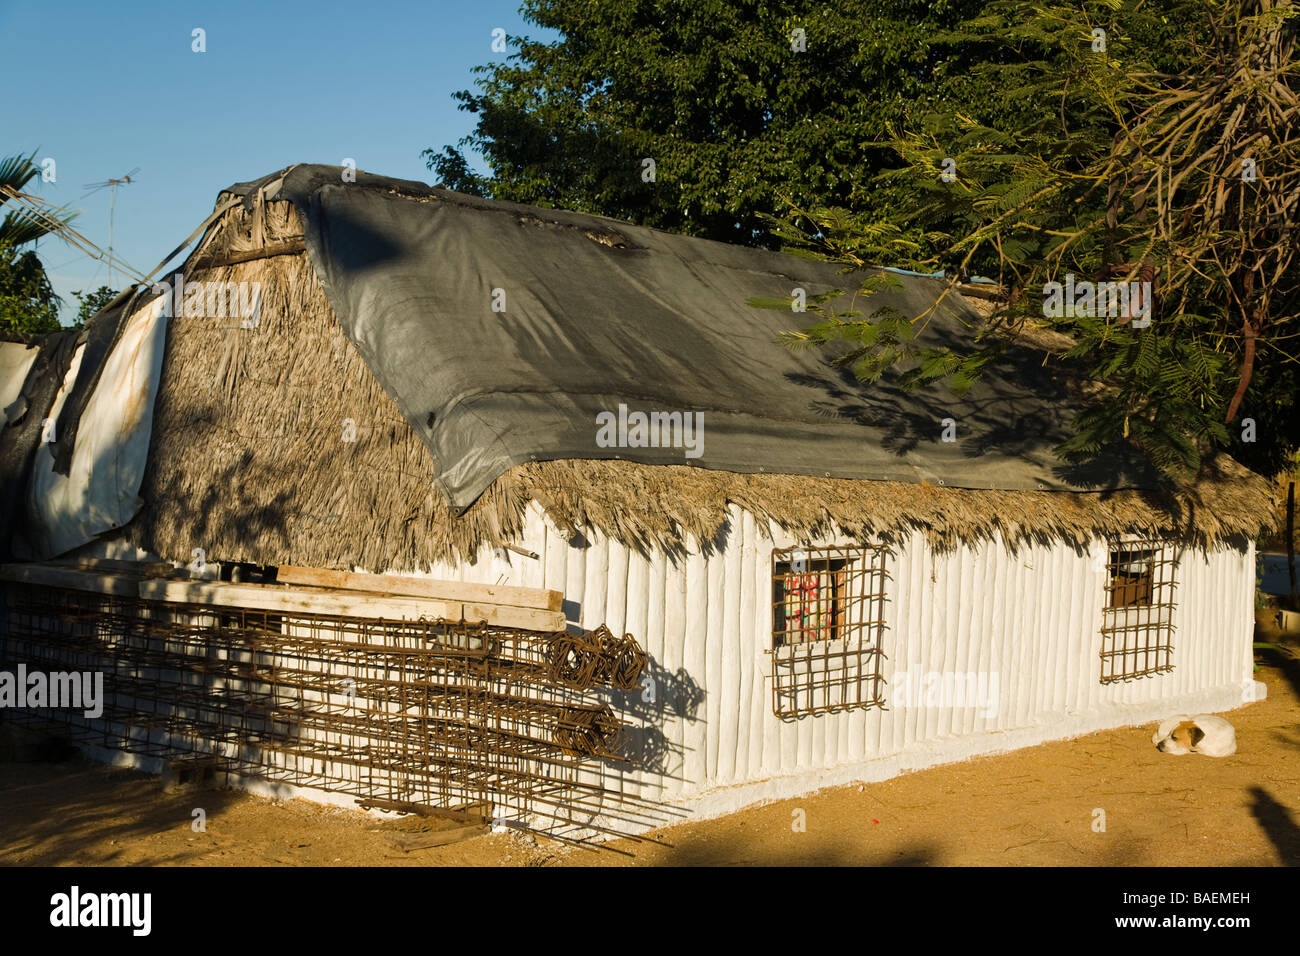 MEXICO La Playita Dog sleeping in sand outside small wooden house with tarp spread over thatched roof Stock Photo